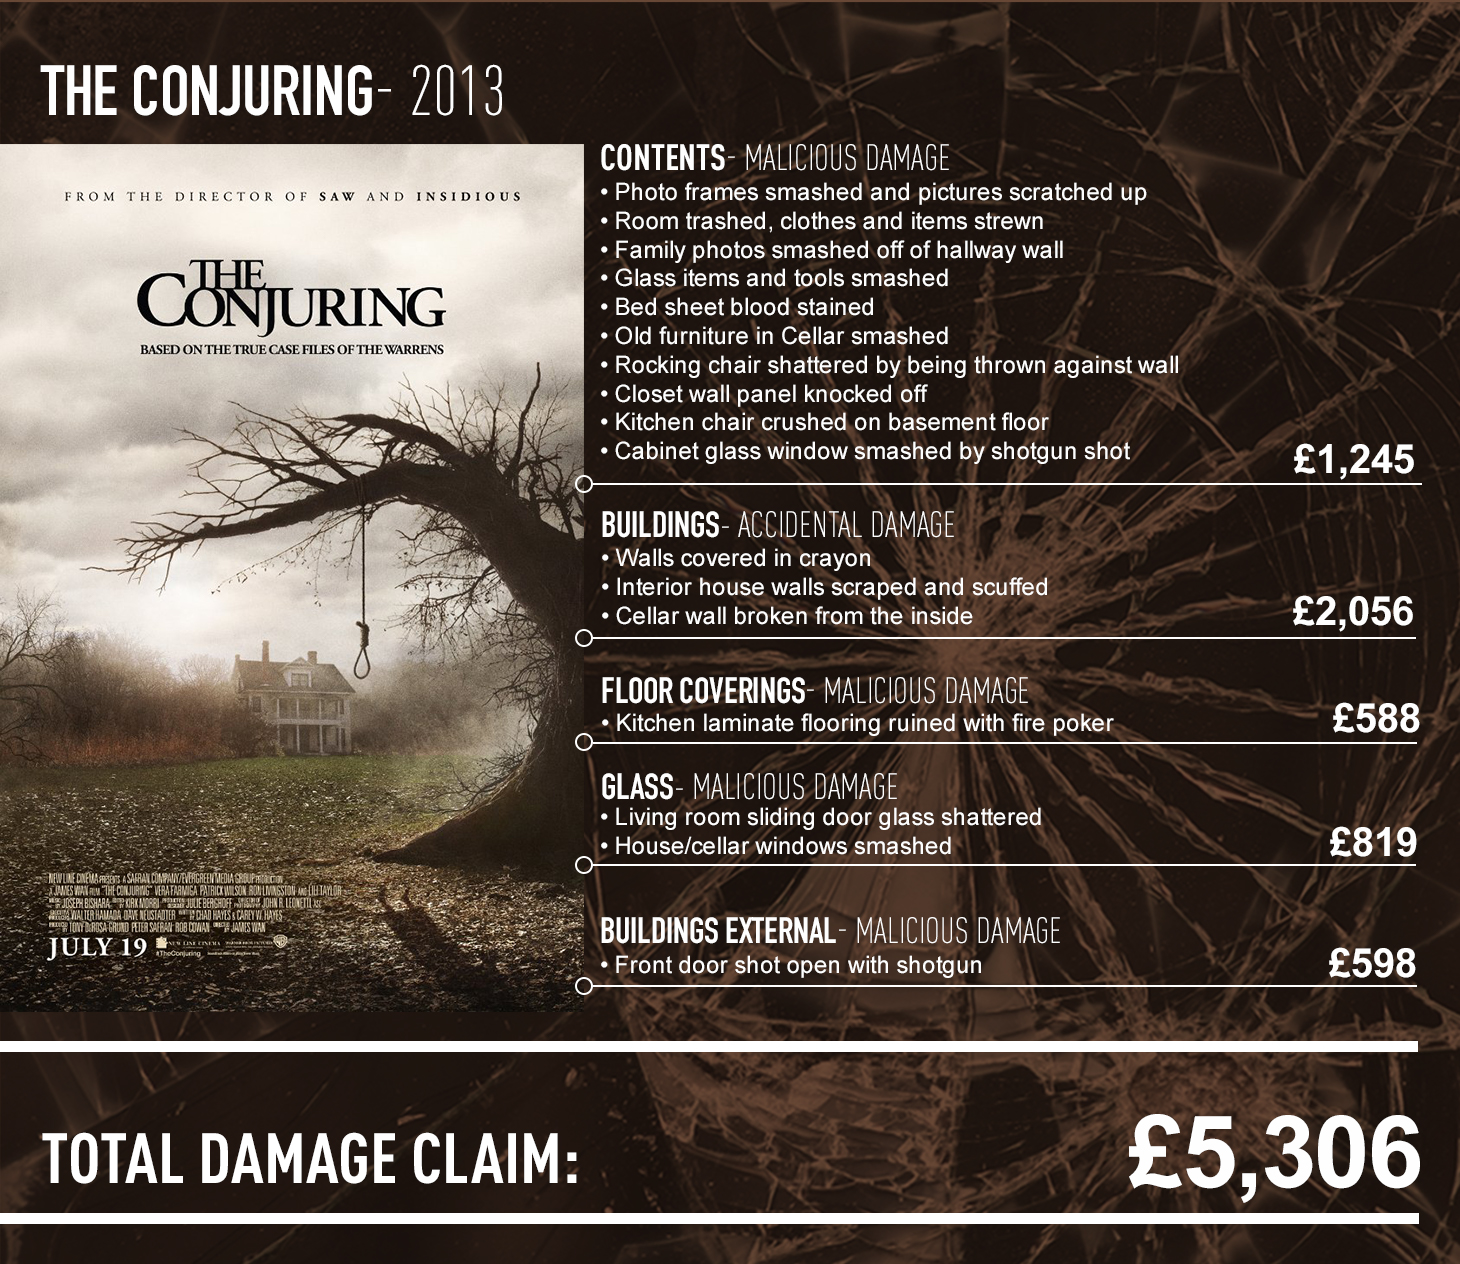 The conjuring claims report